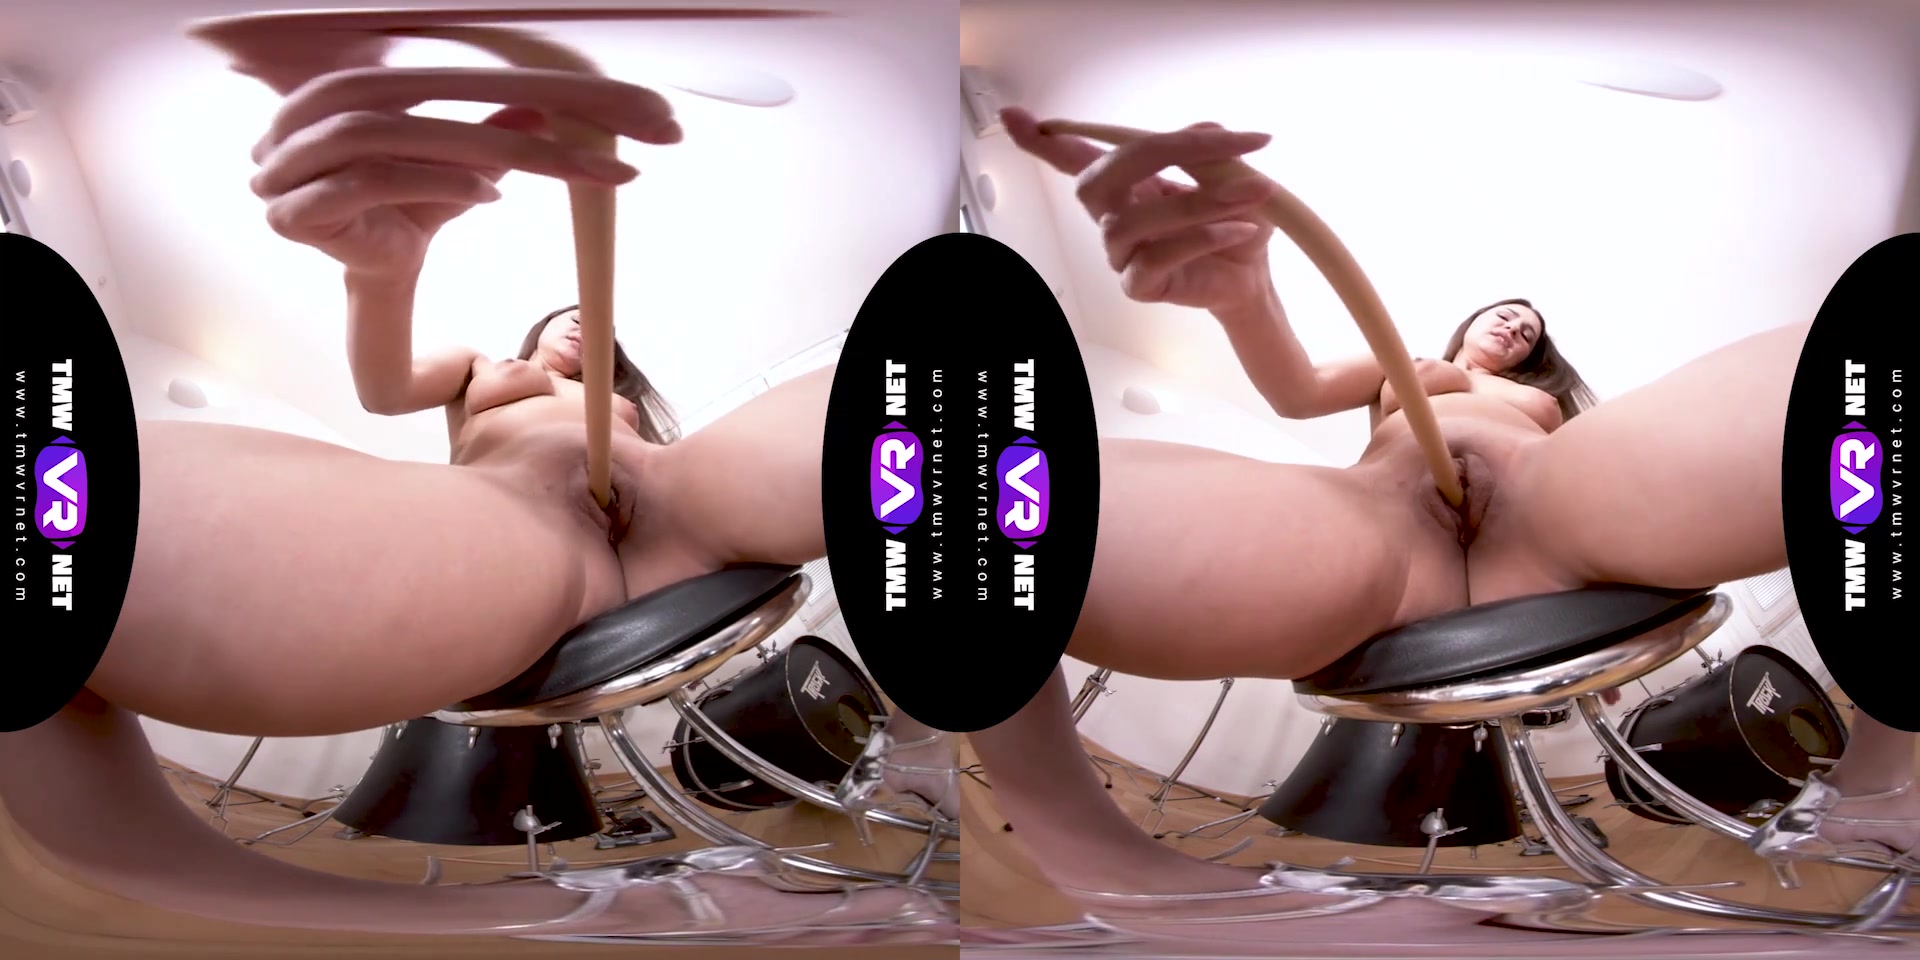 Ellen Betsy in Drum-N-Bass Masturbation From The Extremely Hot Br - TMWVRNet